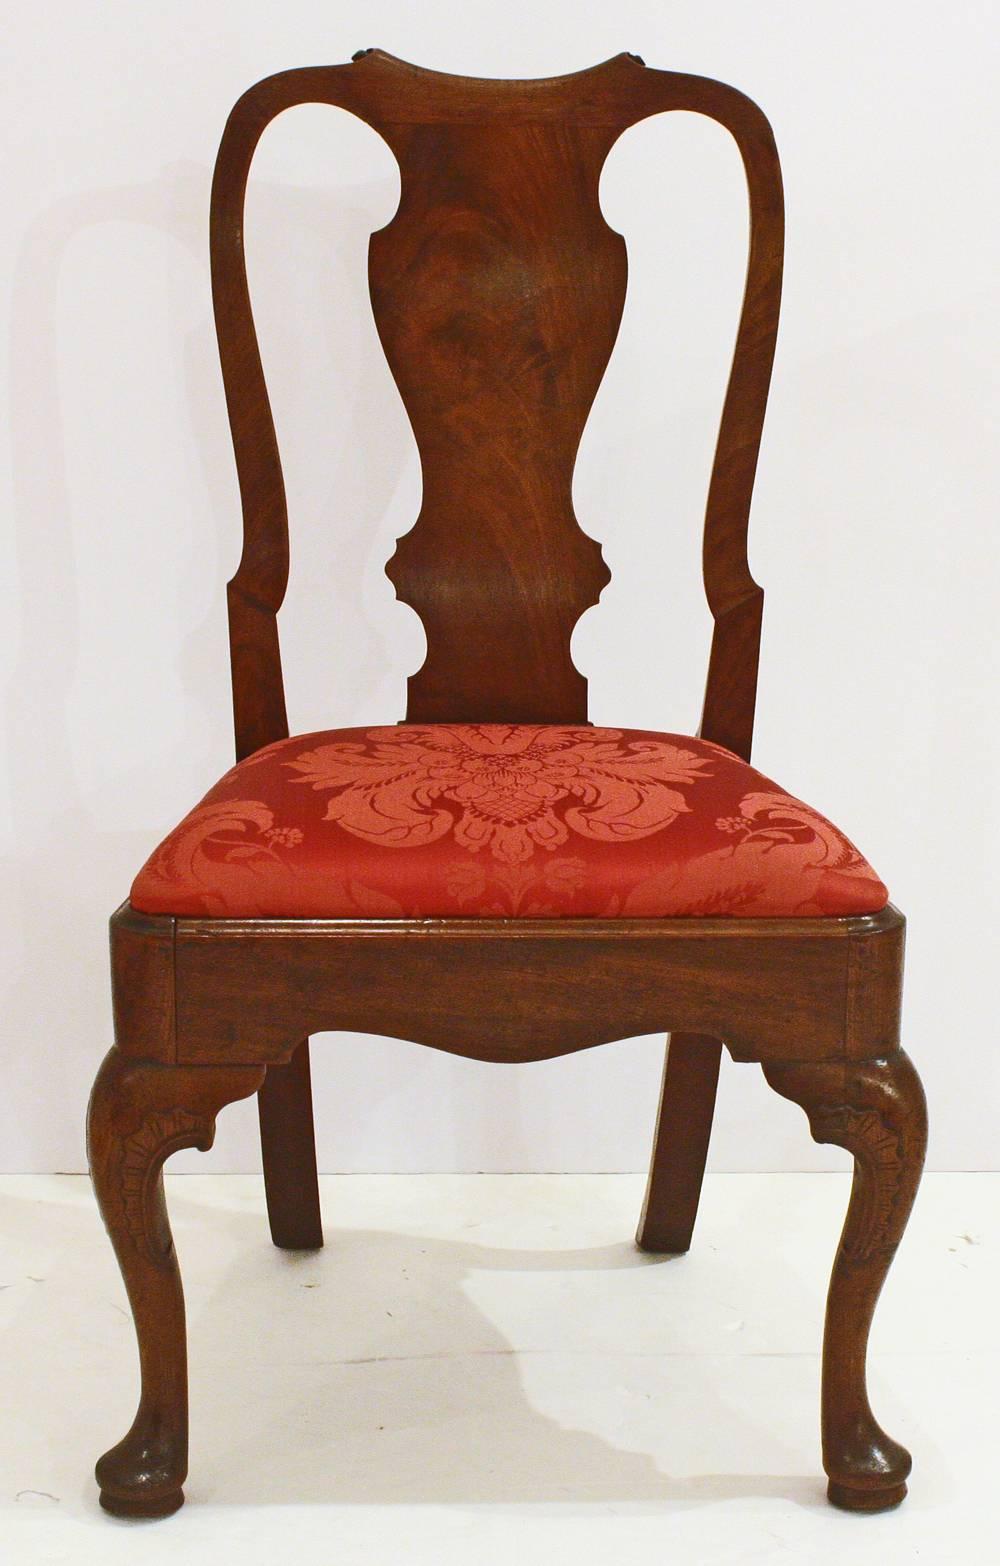 Set of five late George II or early George III mahogany side chairs with slip seats upholstered in crimson silk damask, shaped crest rail and stiles, vasiform splat, splayed rear legs and shaped cabriole front legs with pad feet.